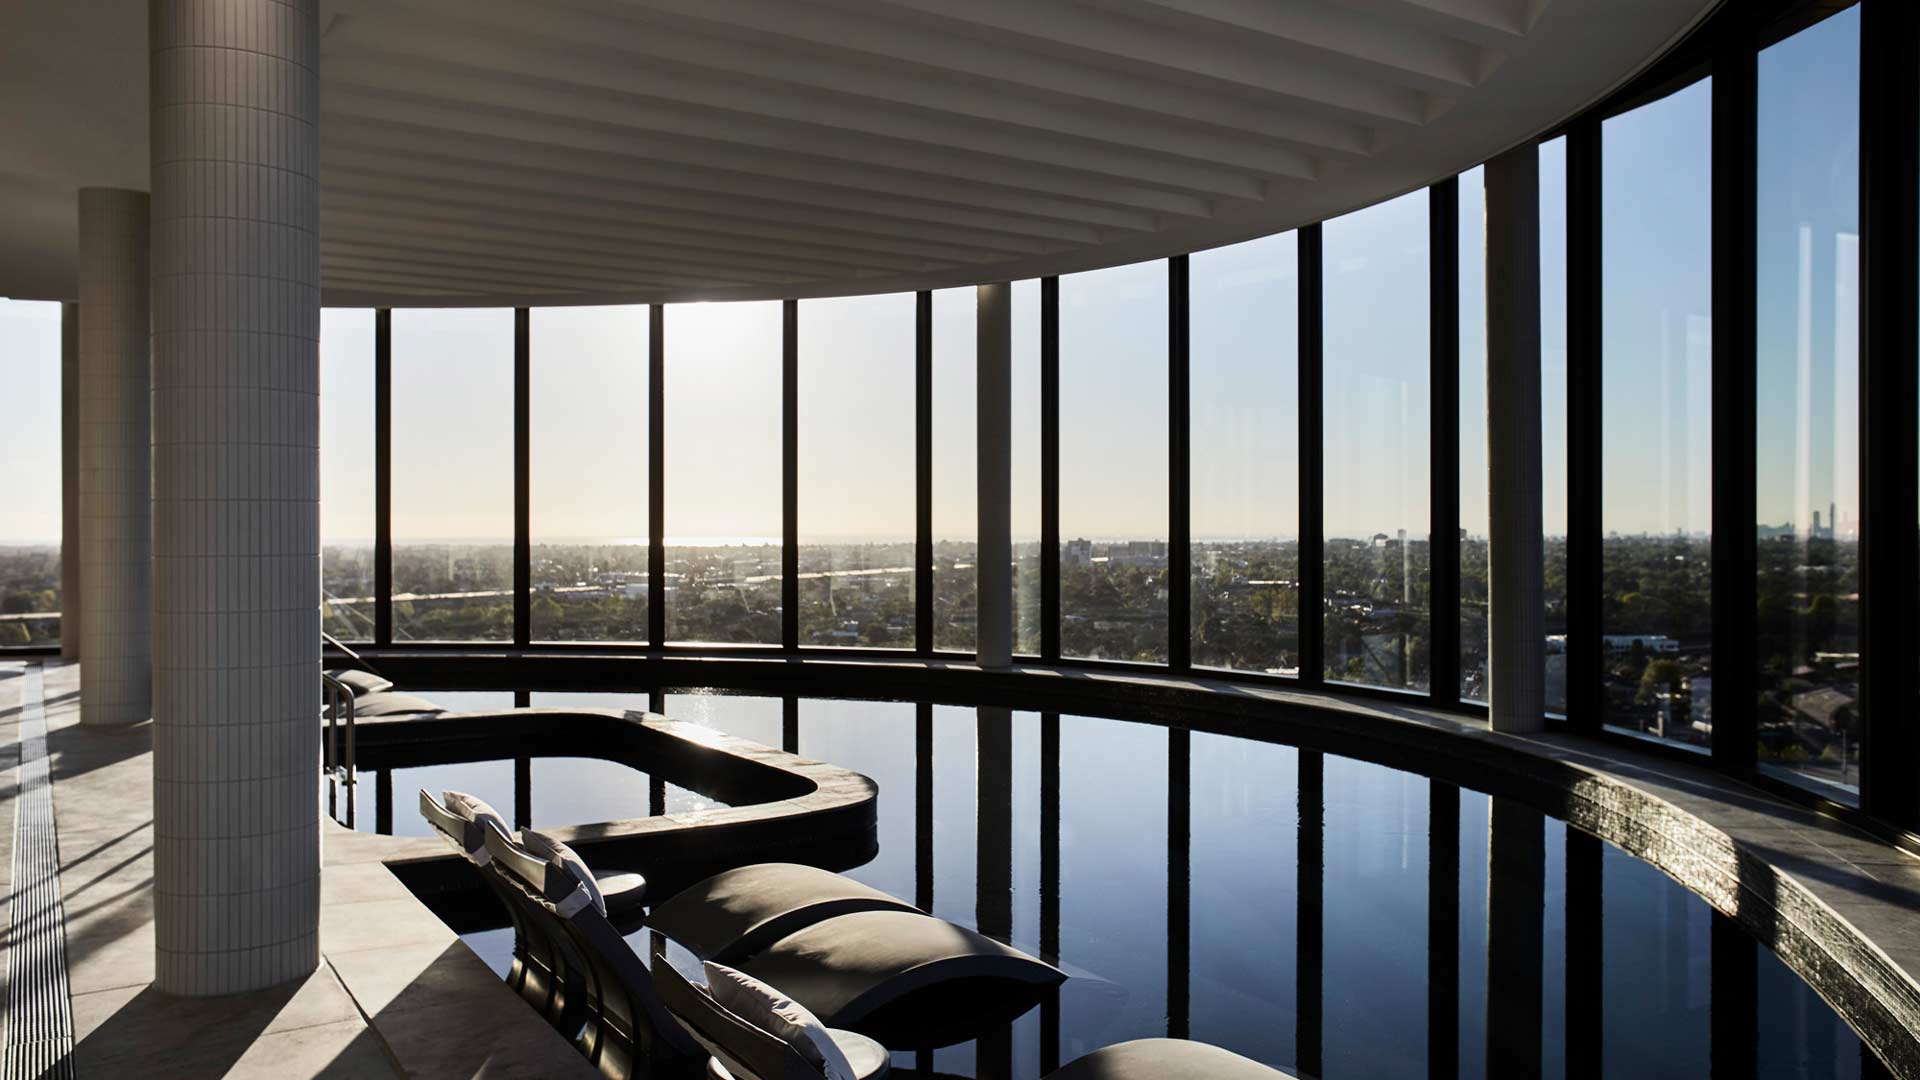 Chadstone Is Now Home to a Luxury 12-Storey Hotel with a Rooftop Pool and Bar